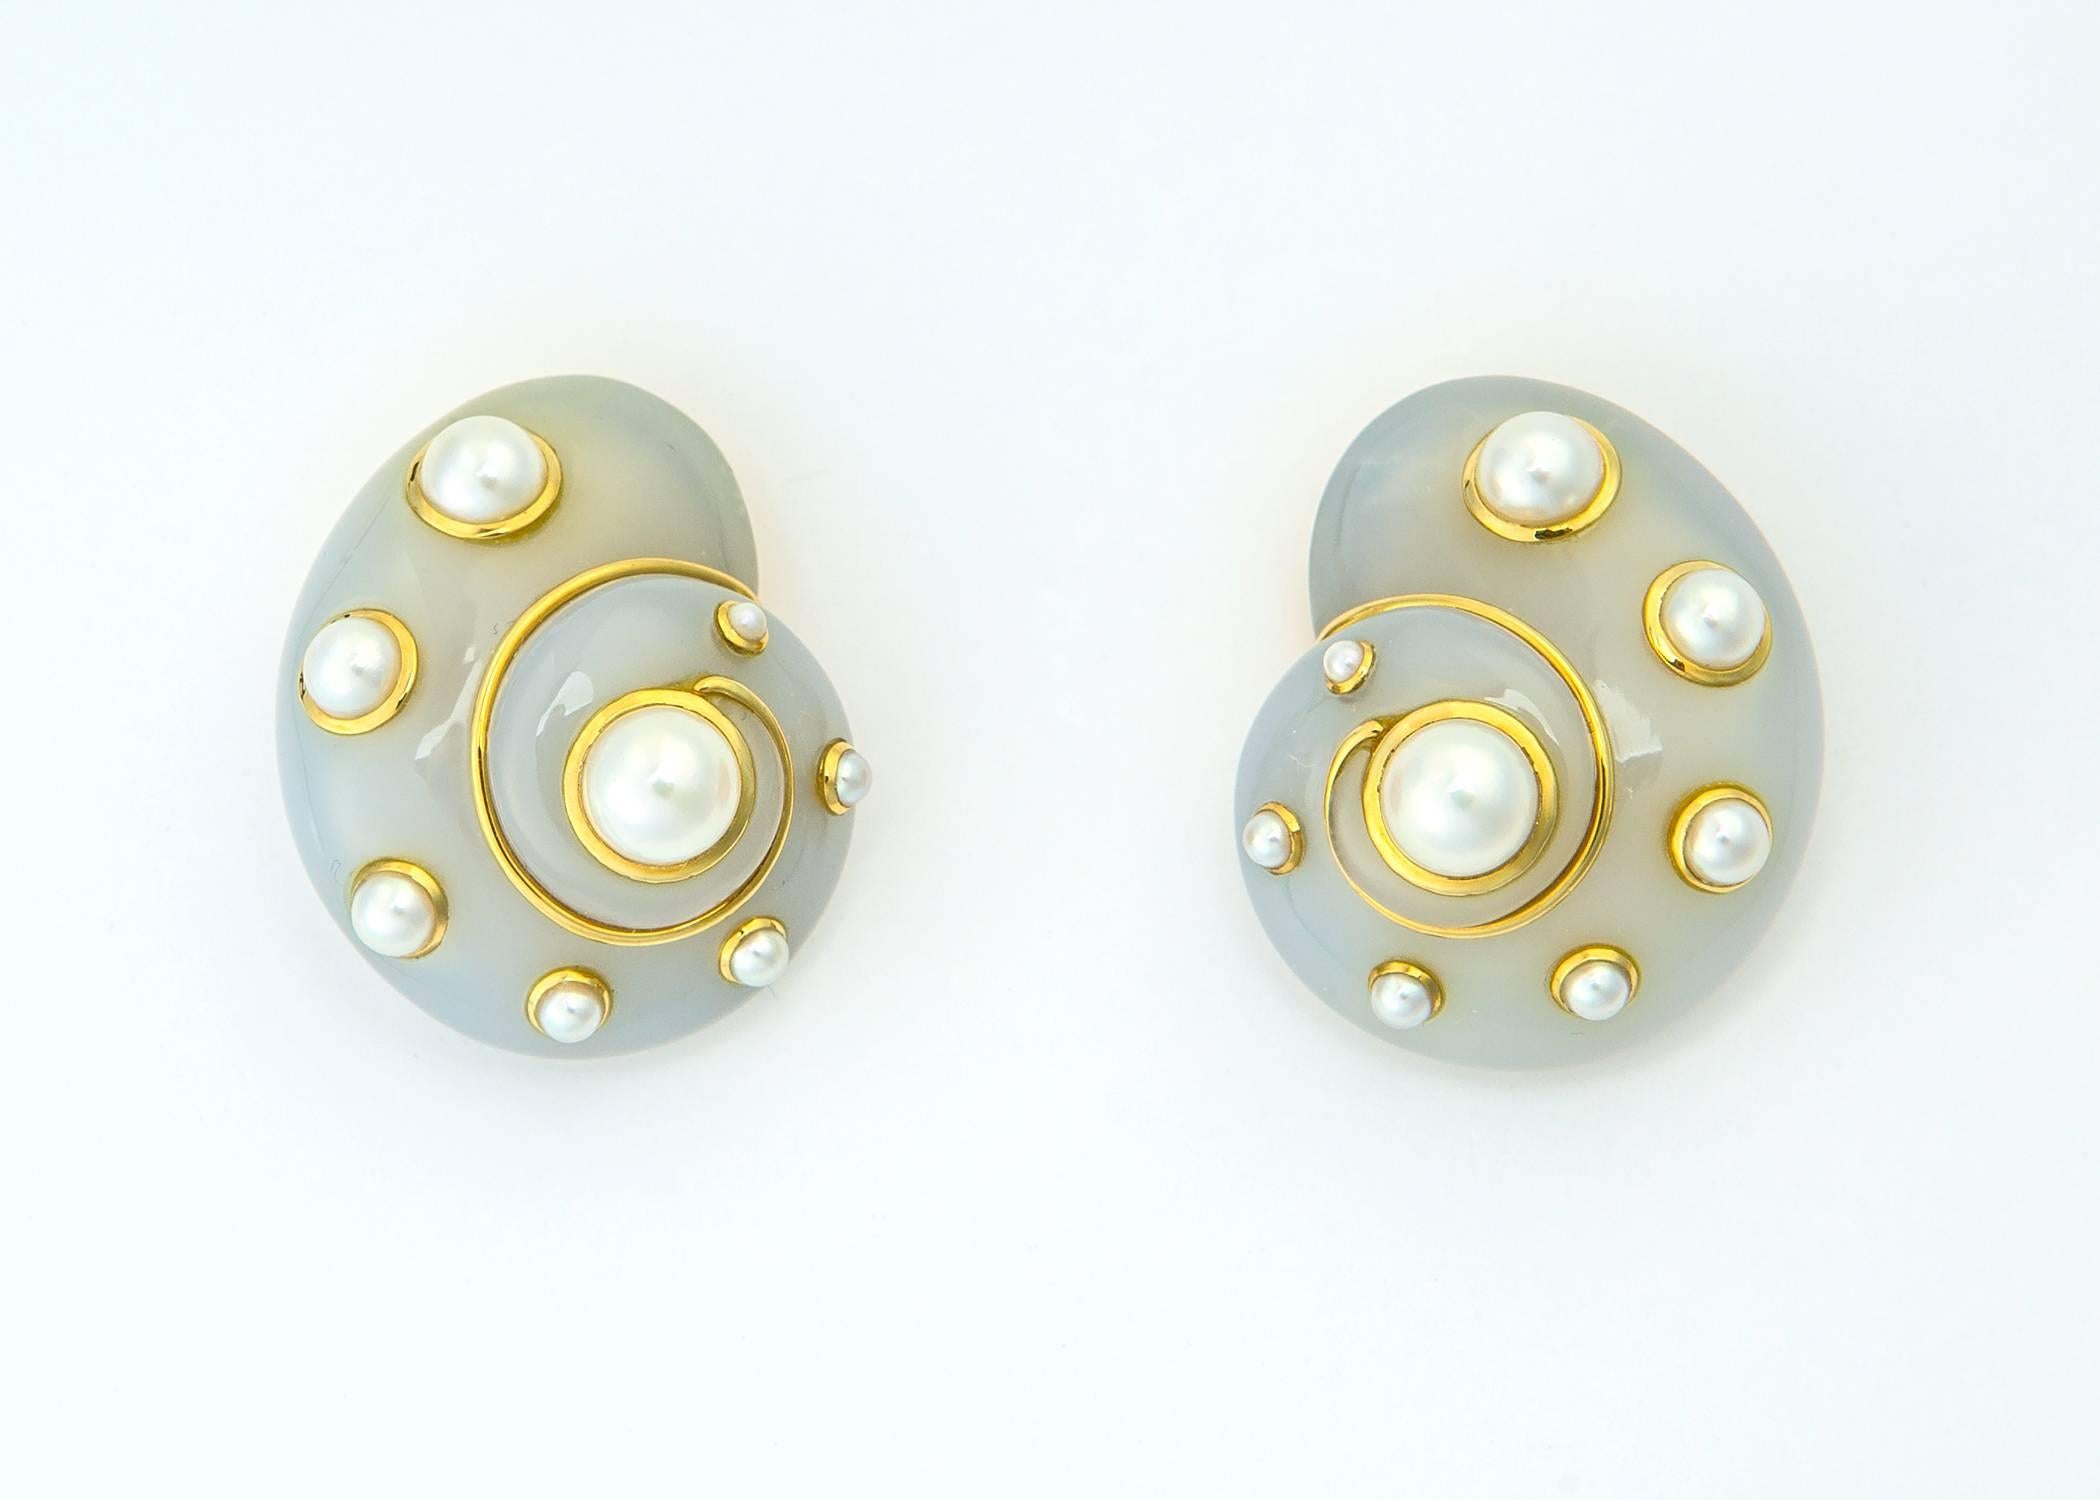 Absolutely one of Verdura's most iconic and sought after designs. Chalcedony is carved into a soft shell shape and accented with elegant pearls and rich 18k gold detailing. Approximately 1 1/4 inch by 1 inch in size with clip and poat. Simply chic